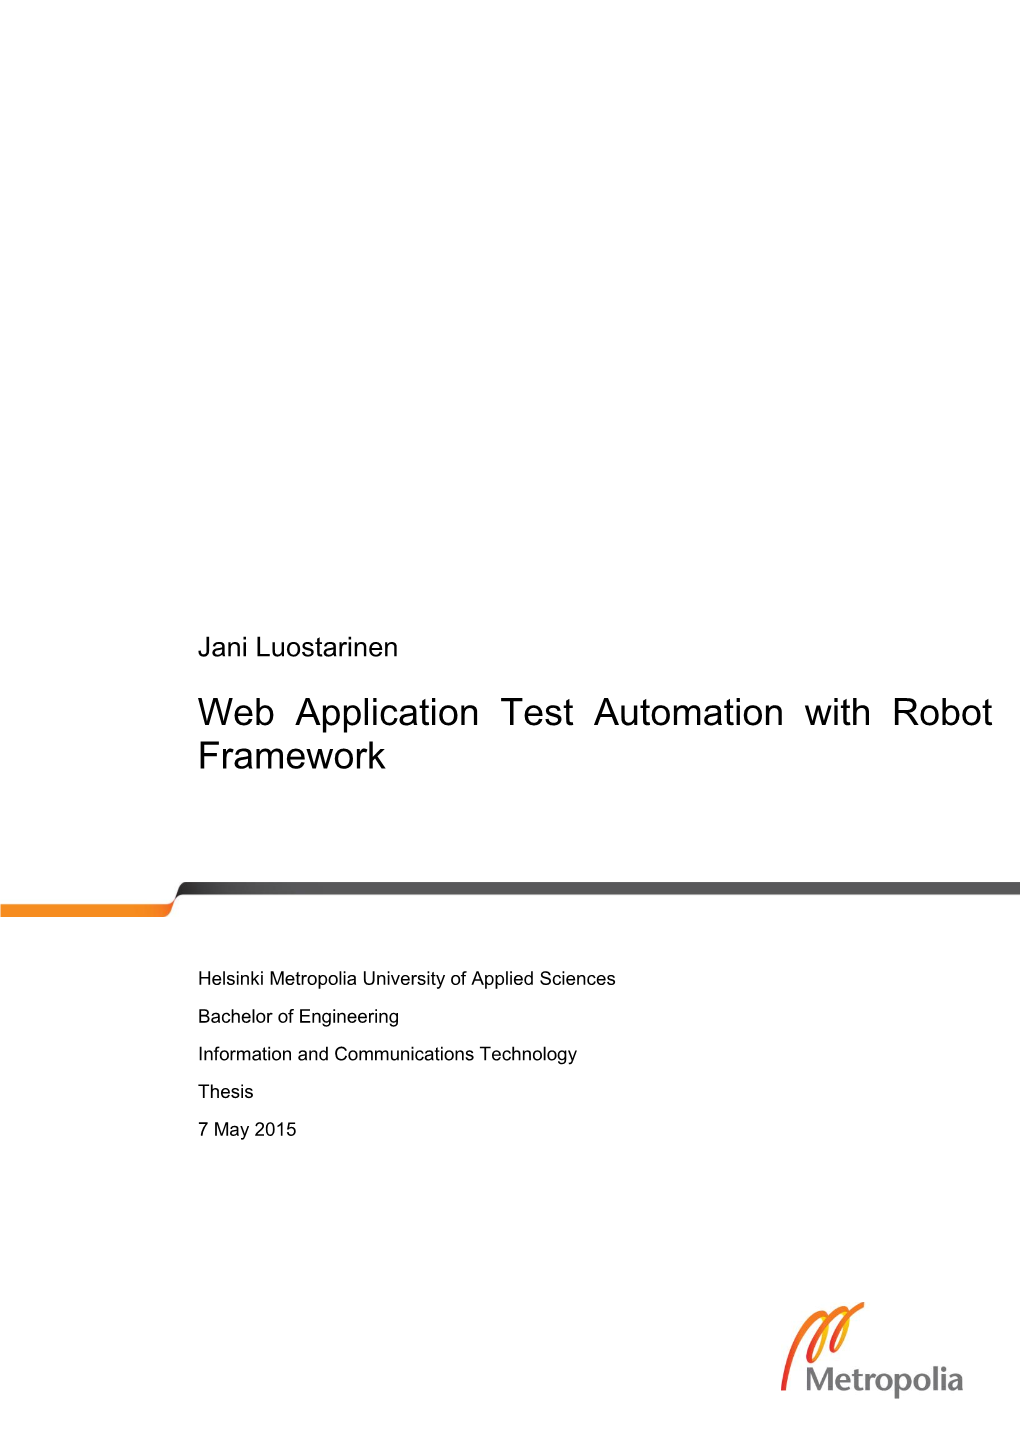 Web Application Test Automation with Robot Framework